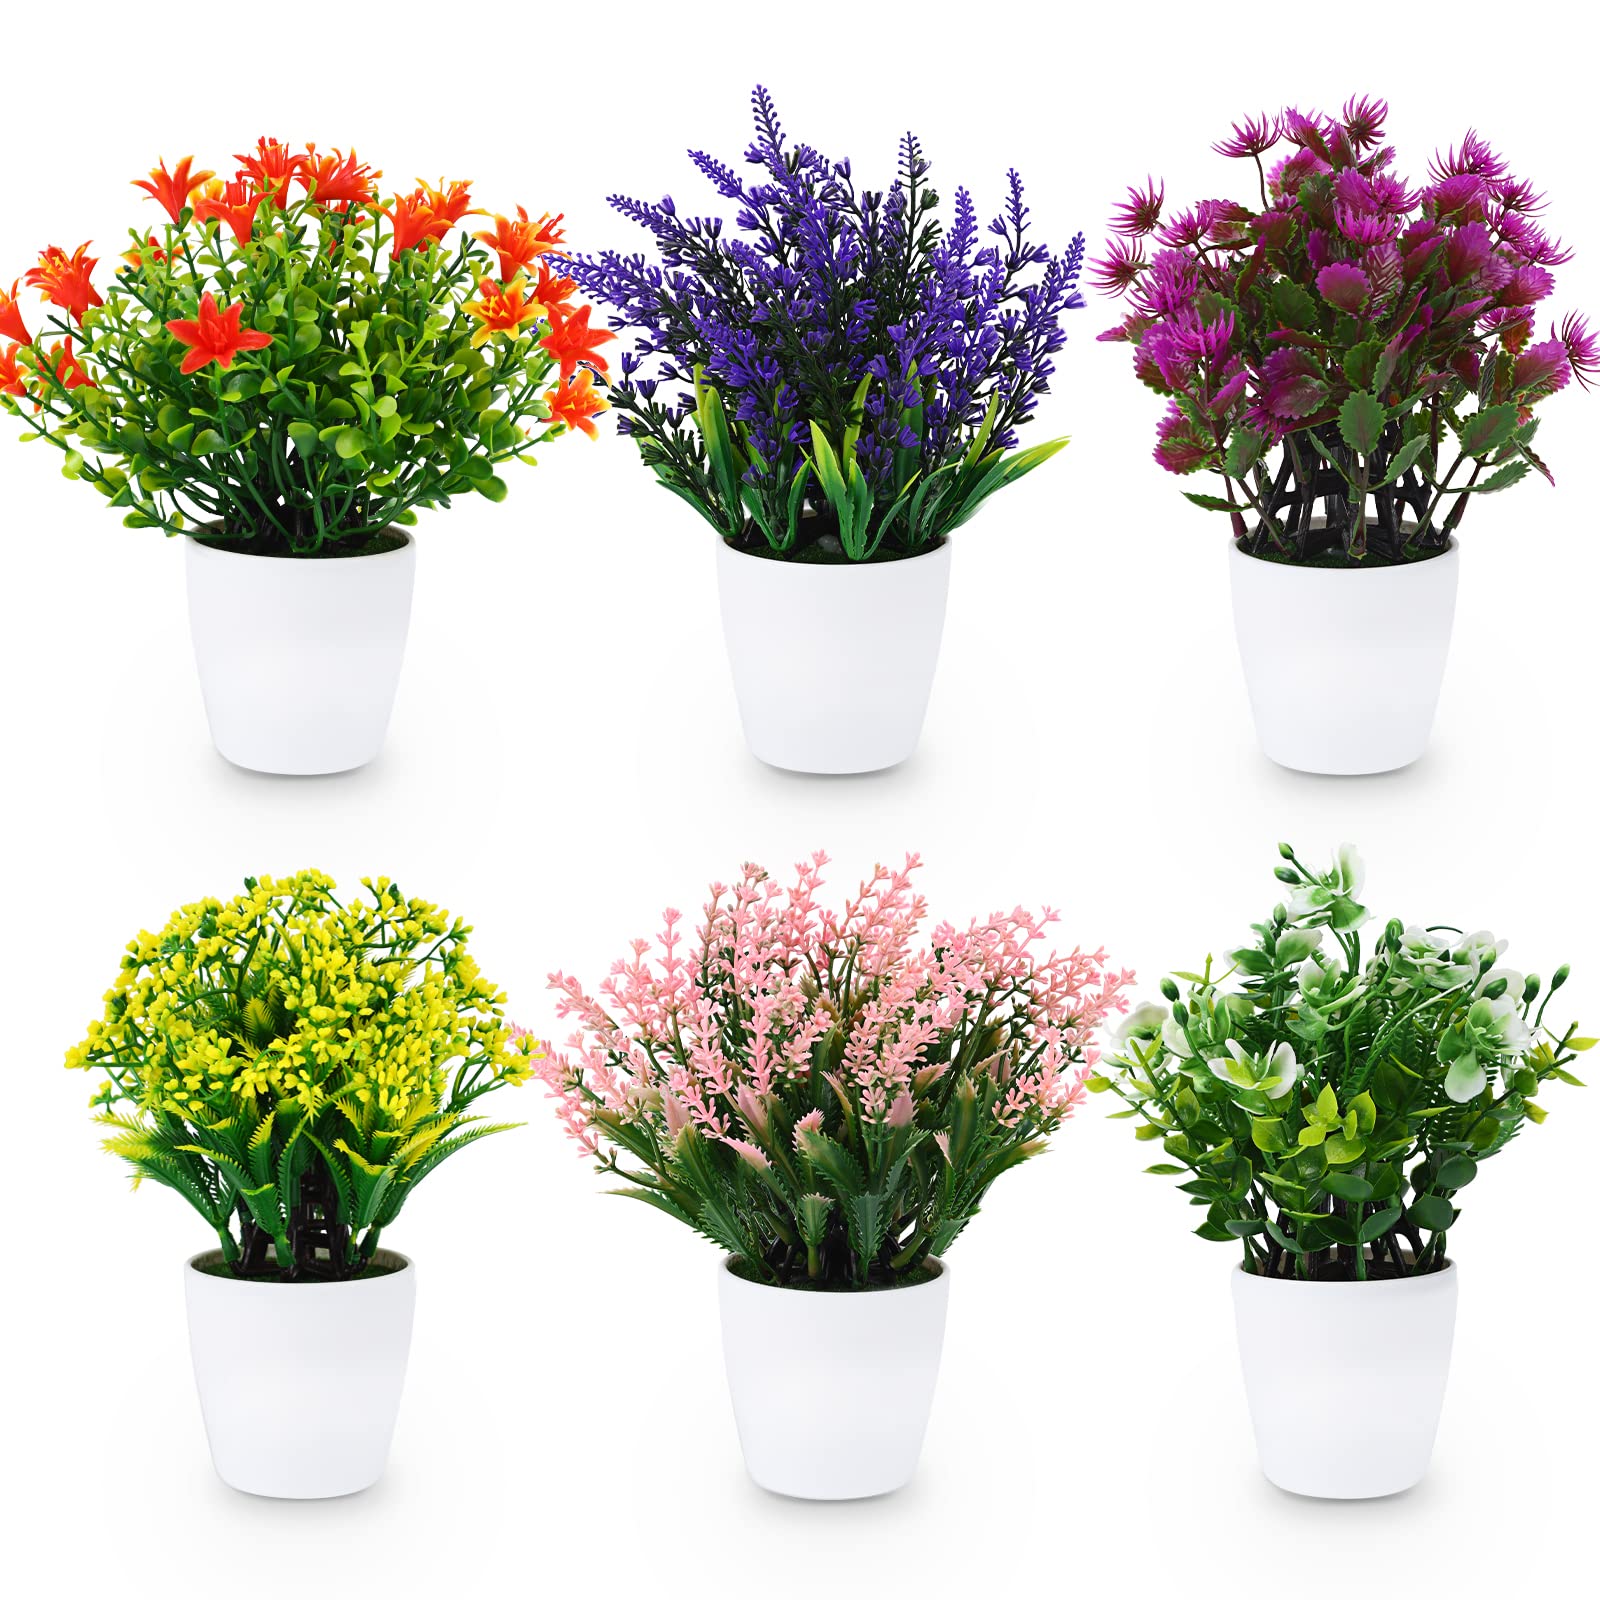 CEWOR Artificial Small Plant 6pcs Faux Plants Fake Flower Potted Plant for Indoor Window Tabletop Office Colorful Flower Plant Colorful Bathroom Decor White